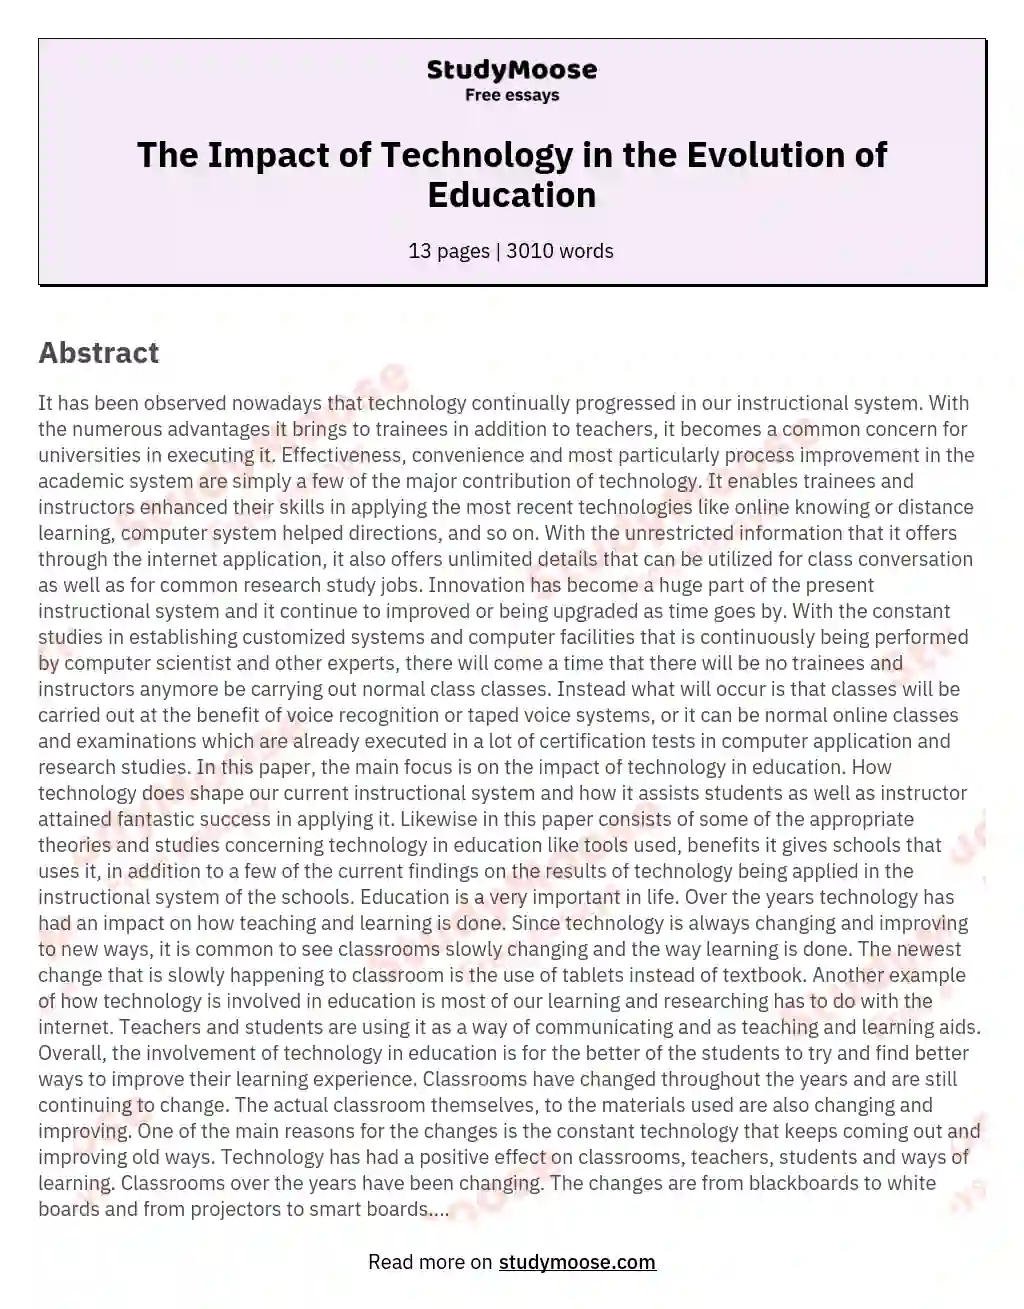 the use of technology in education essay